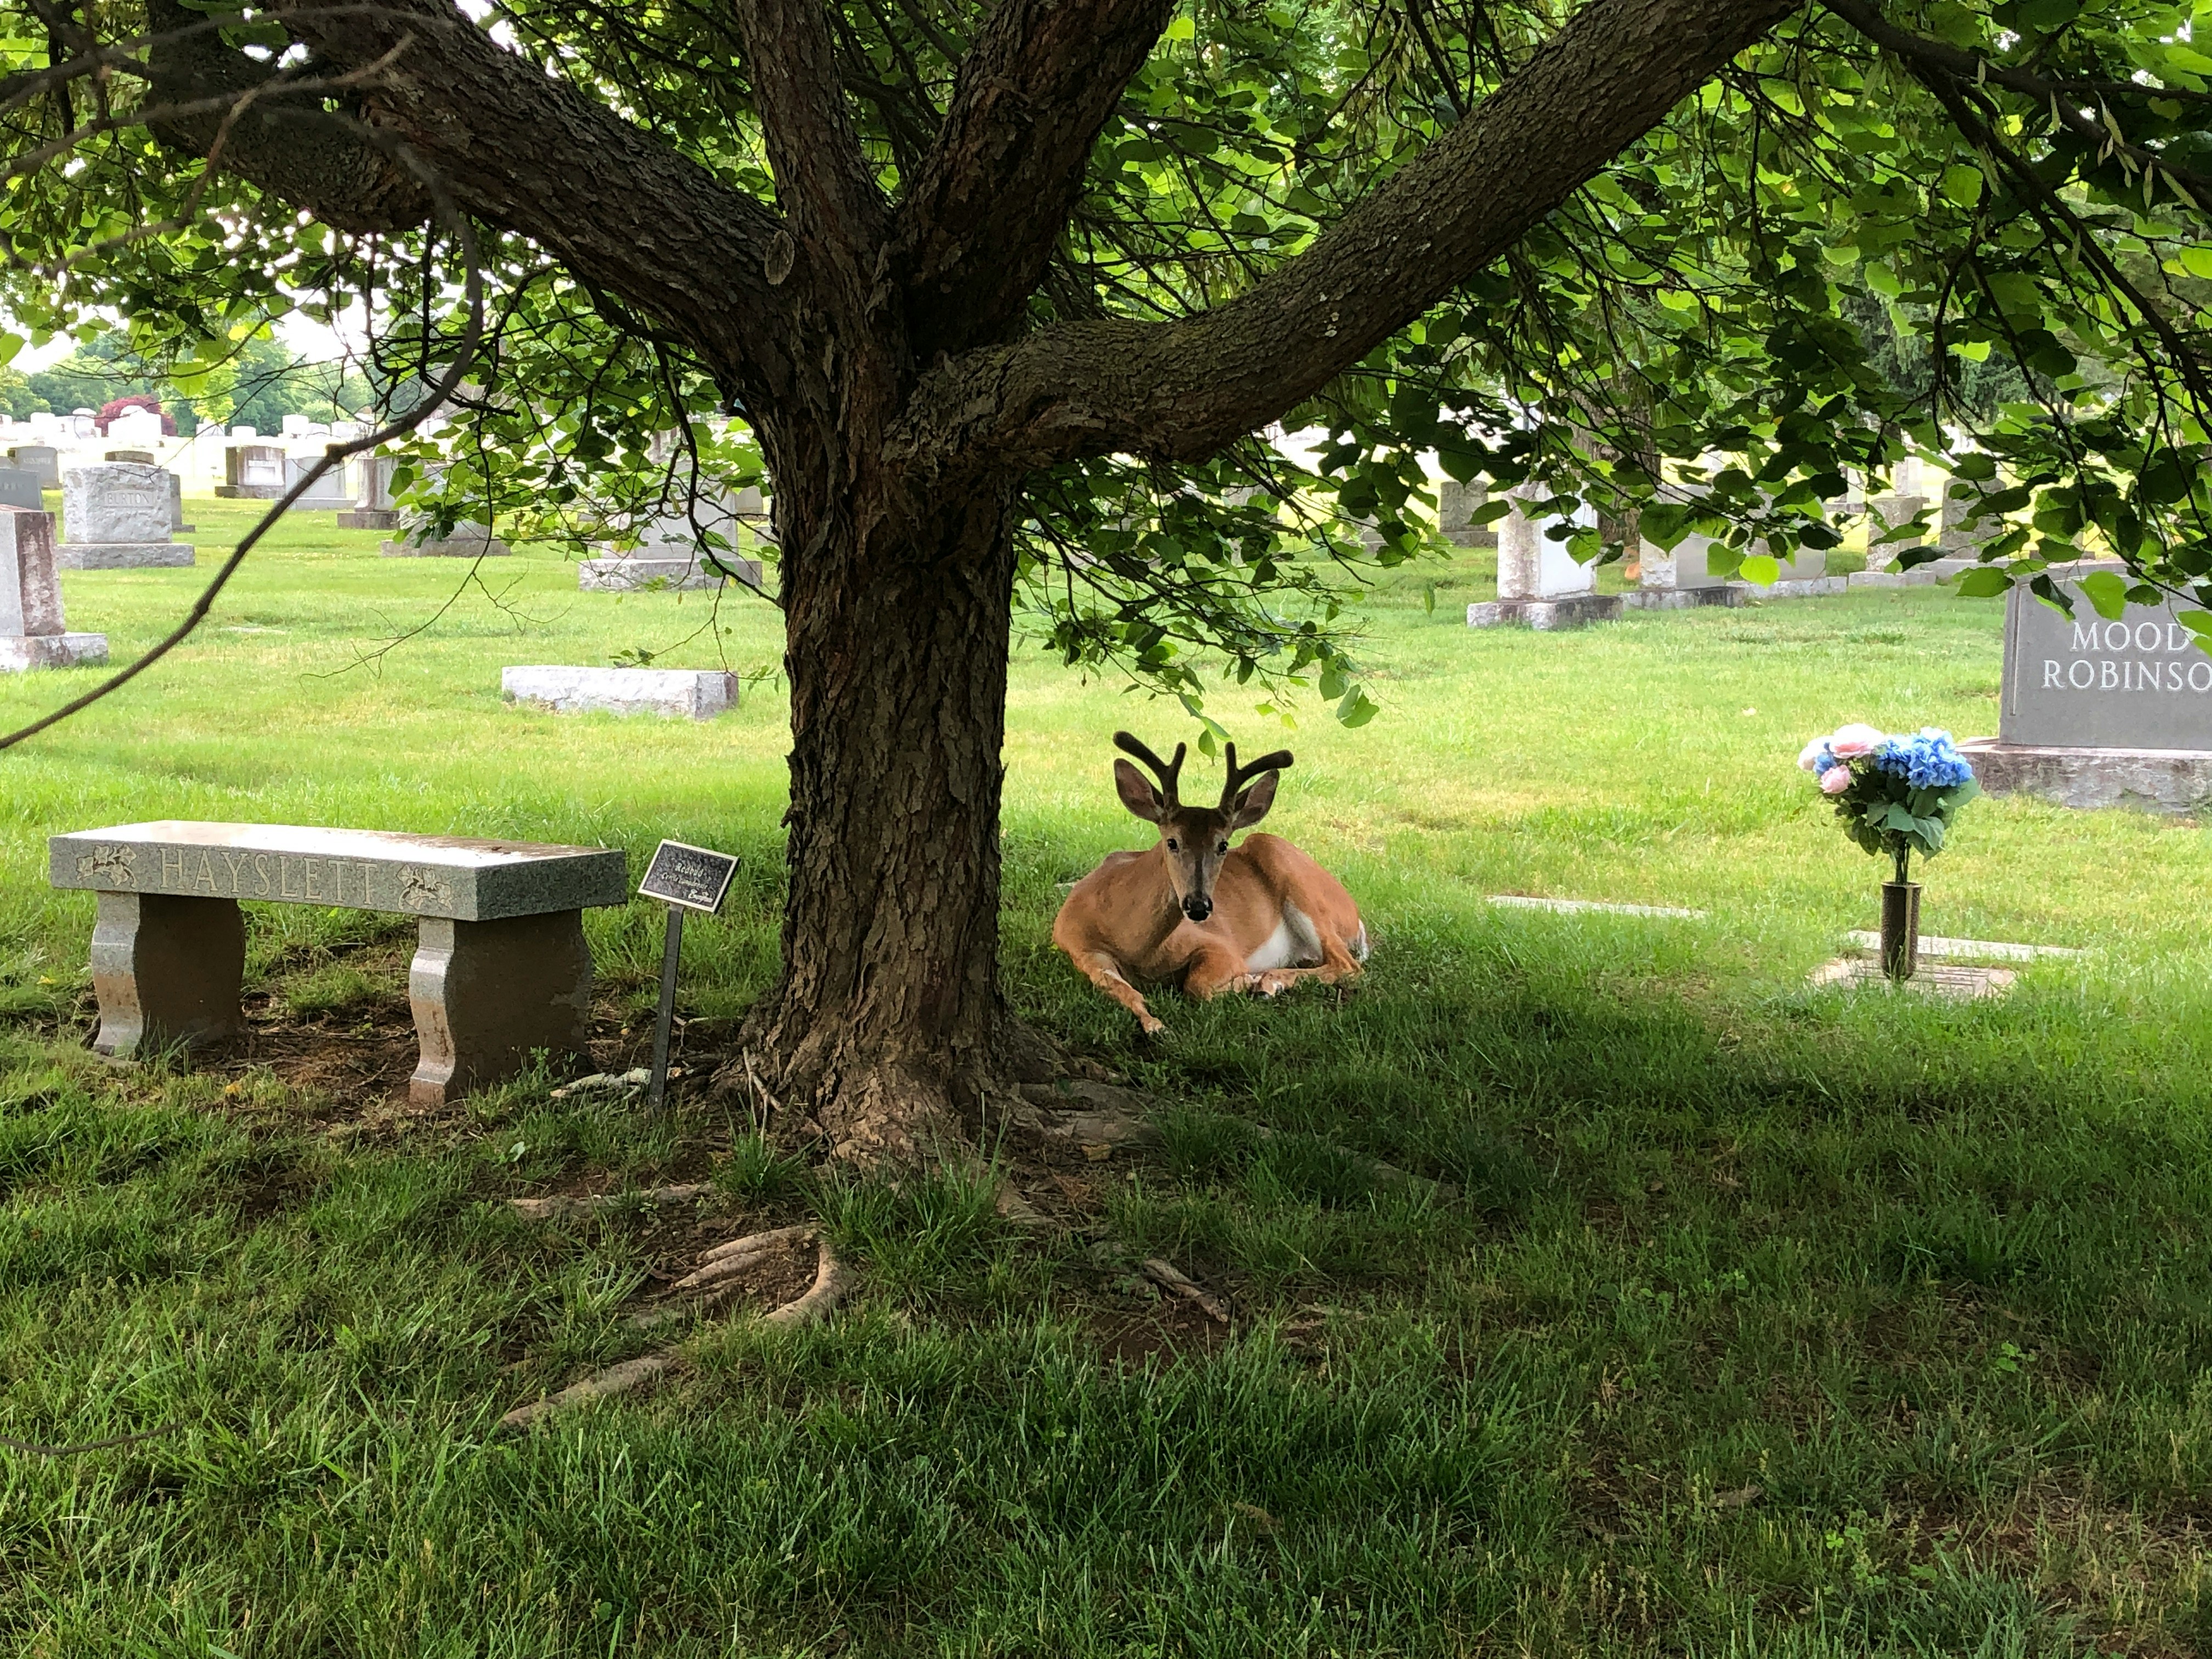 It’s nice to know that Evergreen Burial Park is friendly to wildlife.